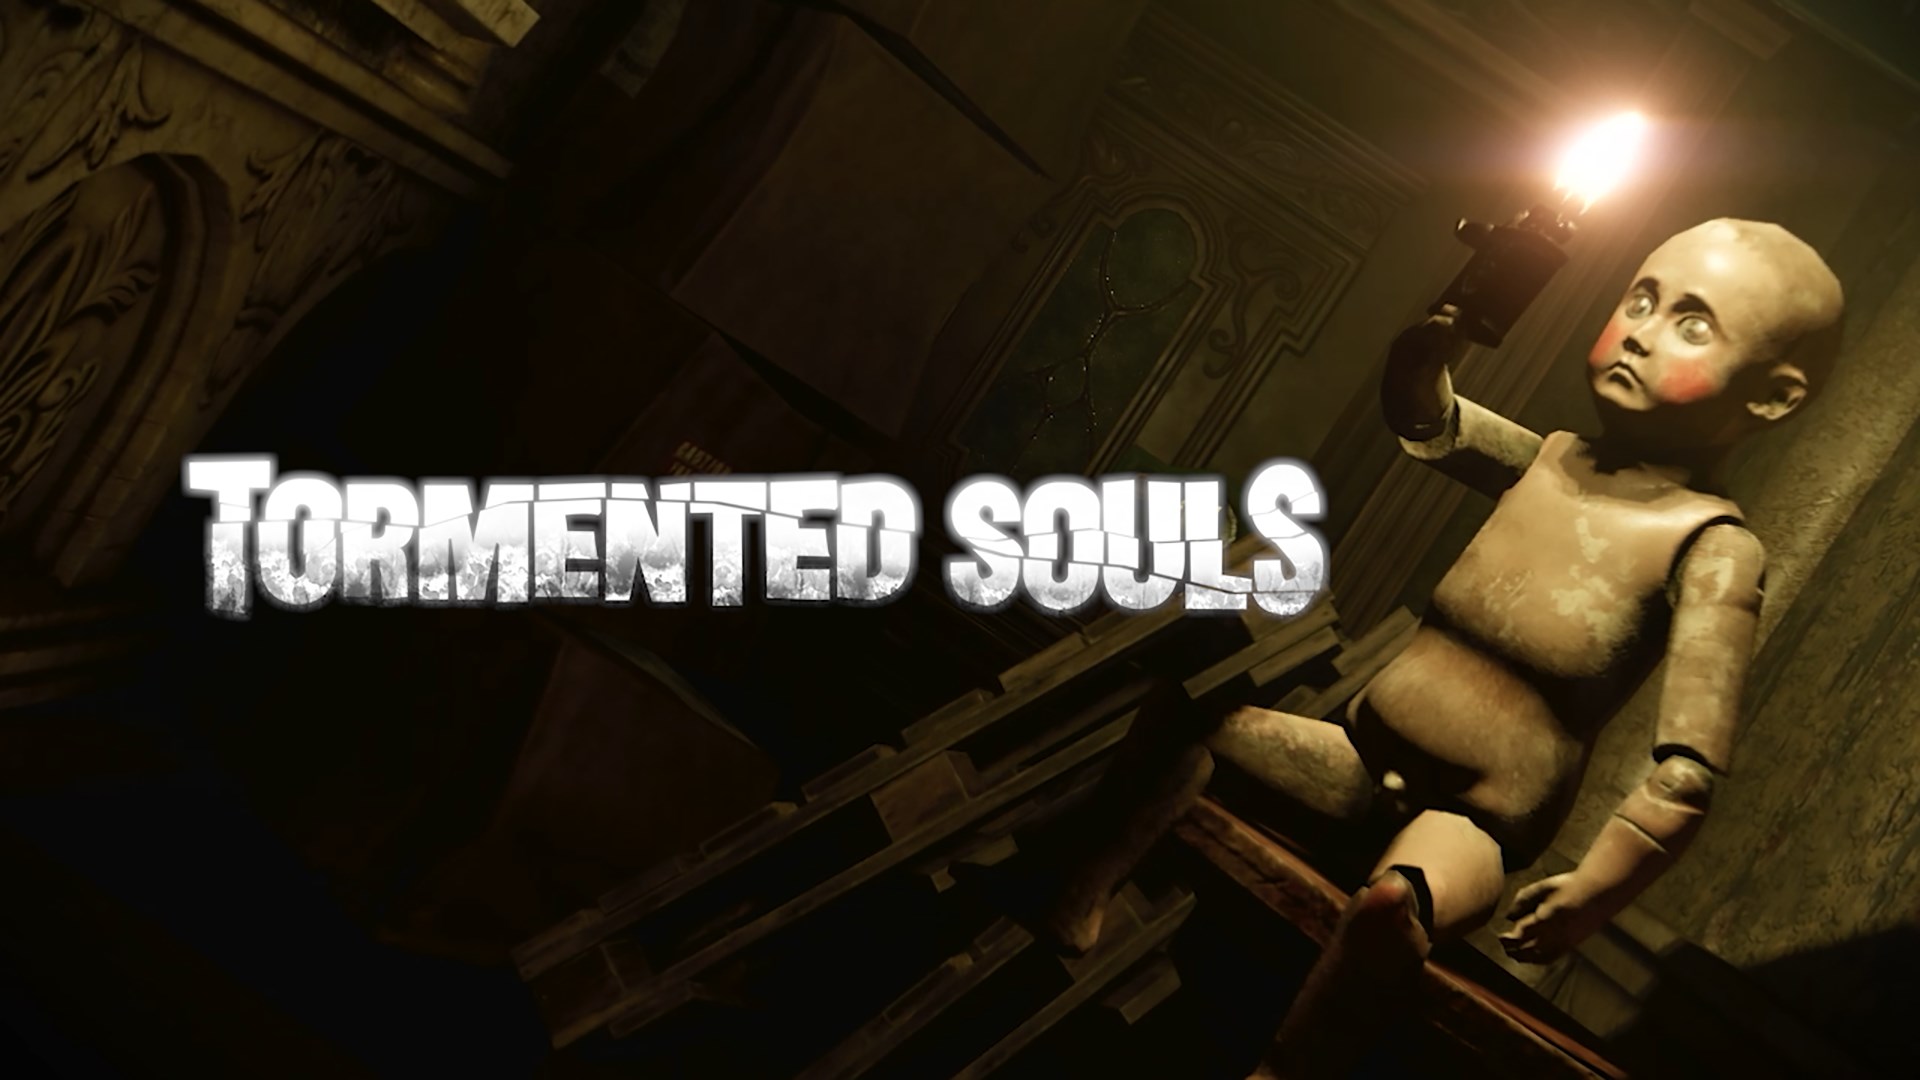 Tormented Souls Is Now Available For Xbox Series X|S - BAM 